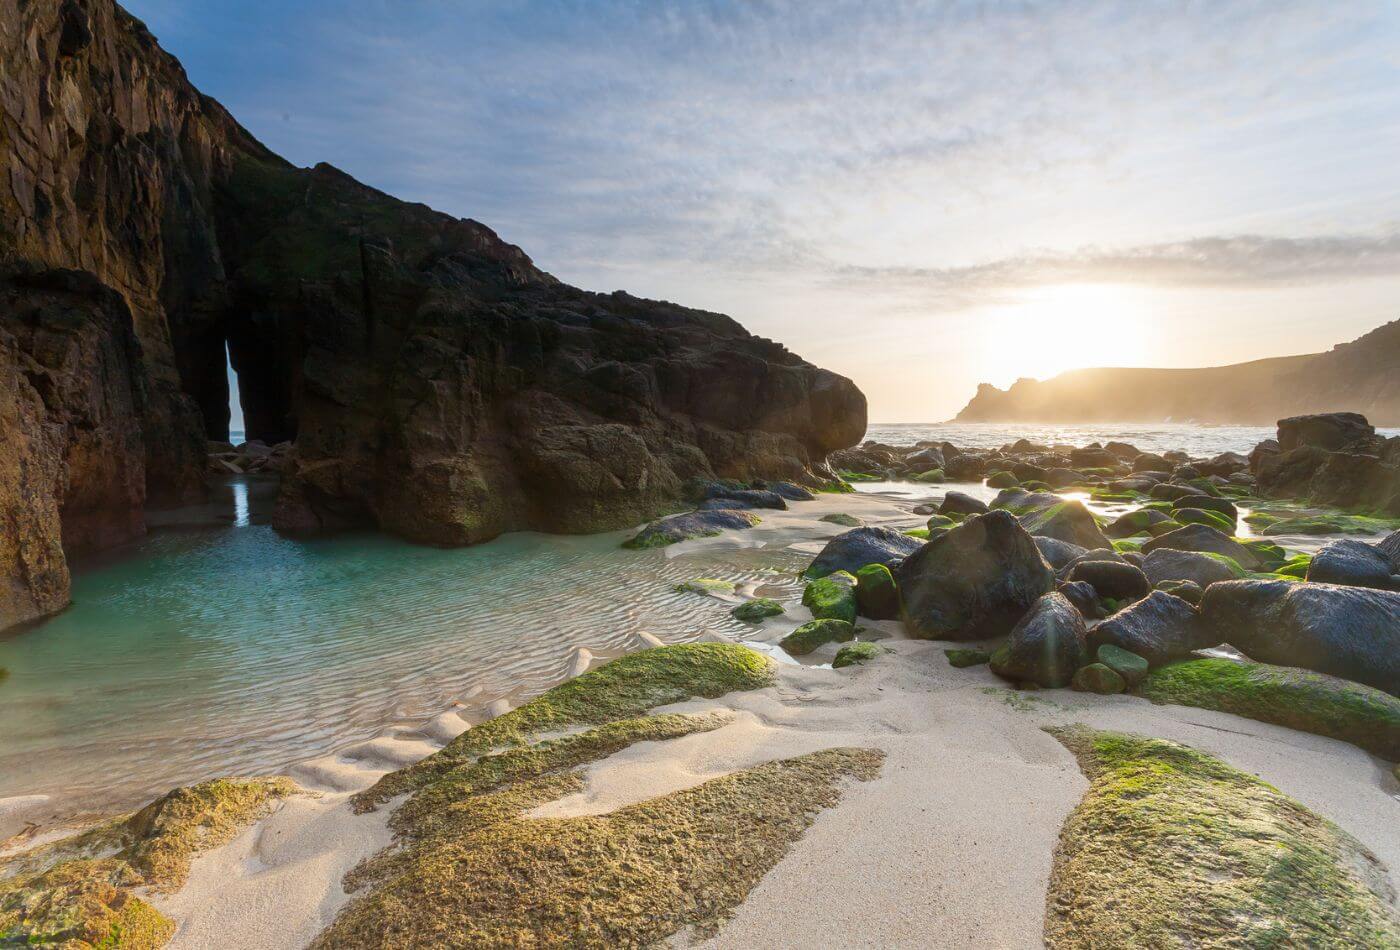 Sunset at Nanjizal, also known as Mill Bay, a beach and cove near Lands End, Cornwall.